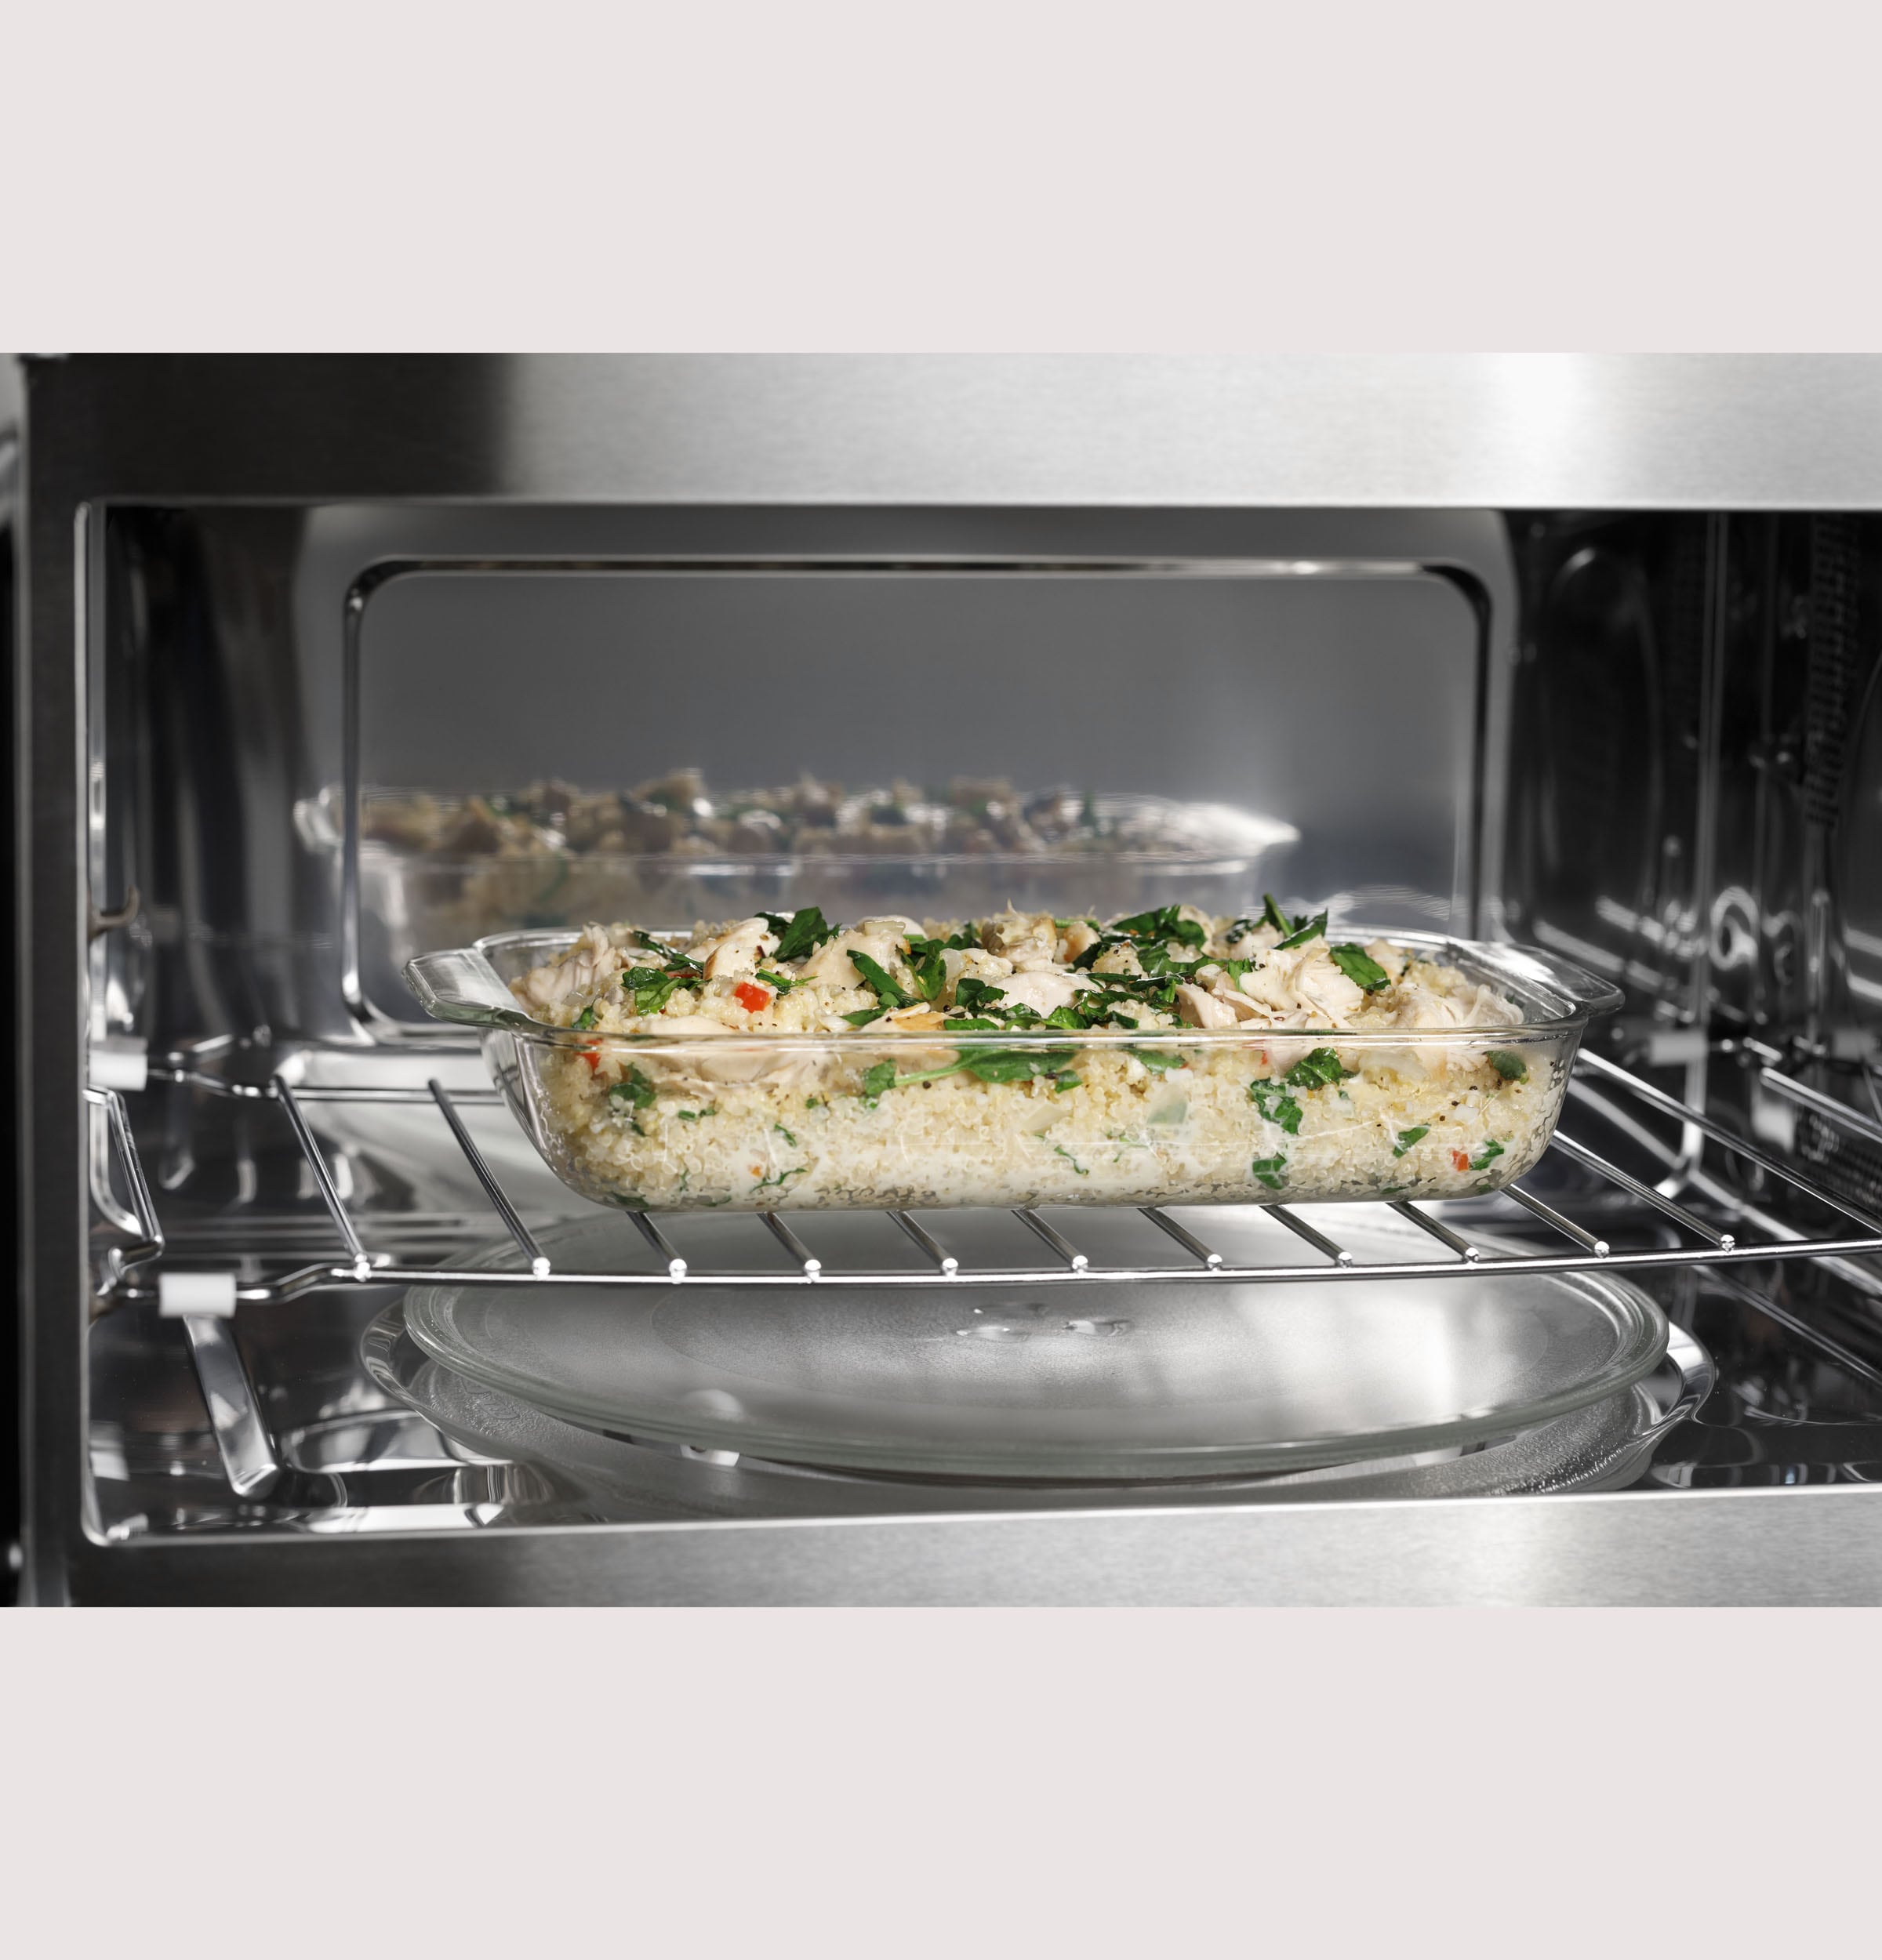 PEB9159SJSS by GE Appliances - GE Profile™ 1.5 Cu. Ft. Countertop  Convection/Microwave Oven